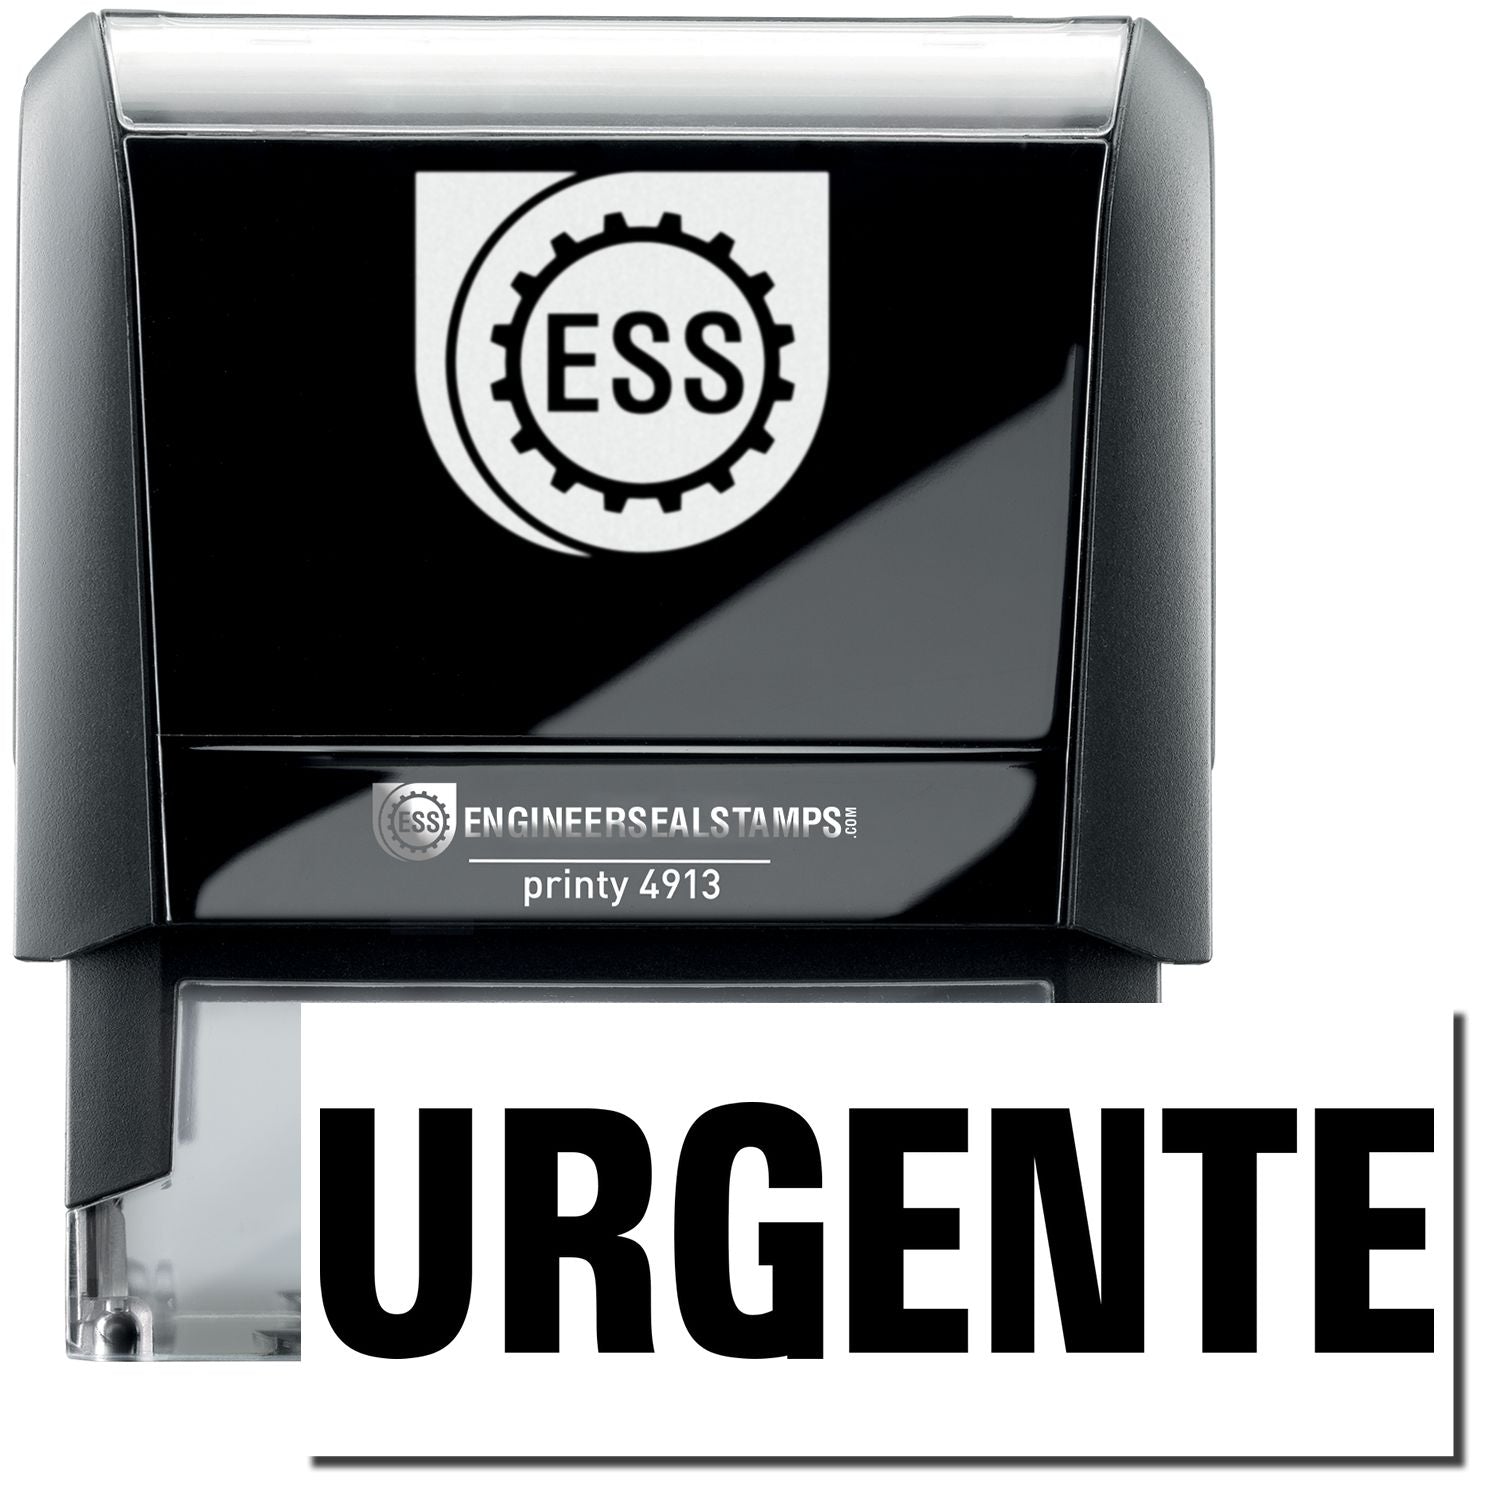 A self-inking stamp with a stamped image showing how the text "URGENTE" in a large font is displayed by it after stamping.